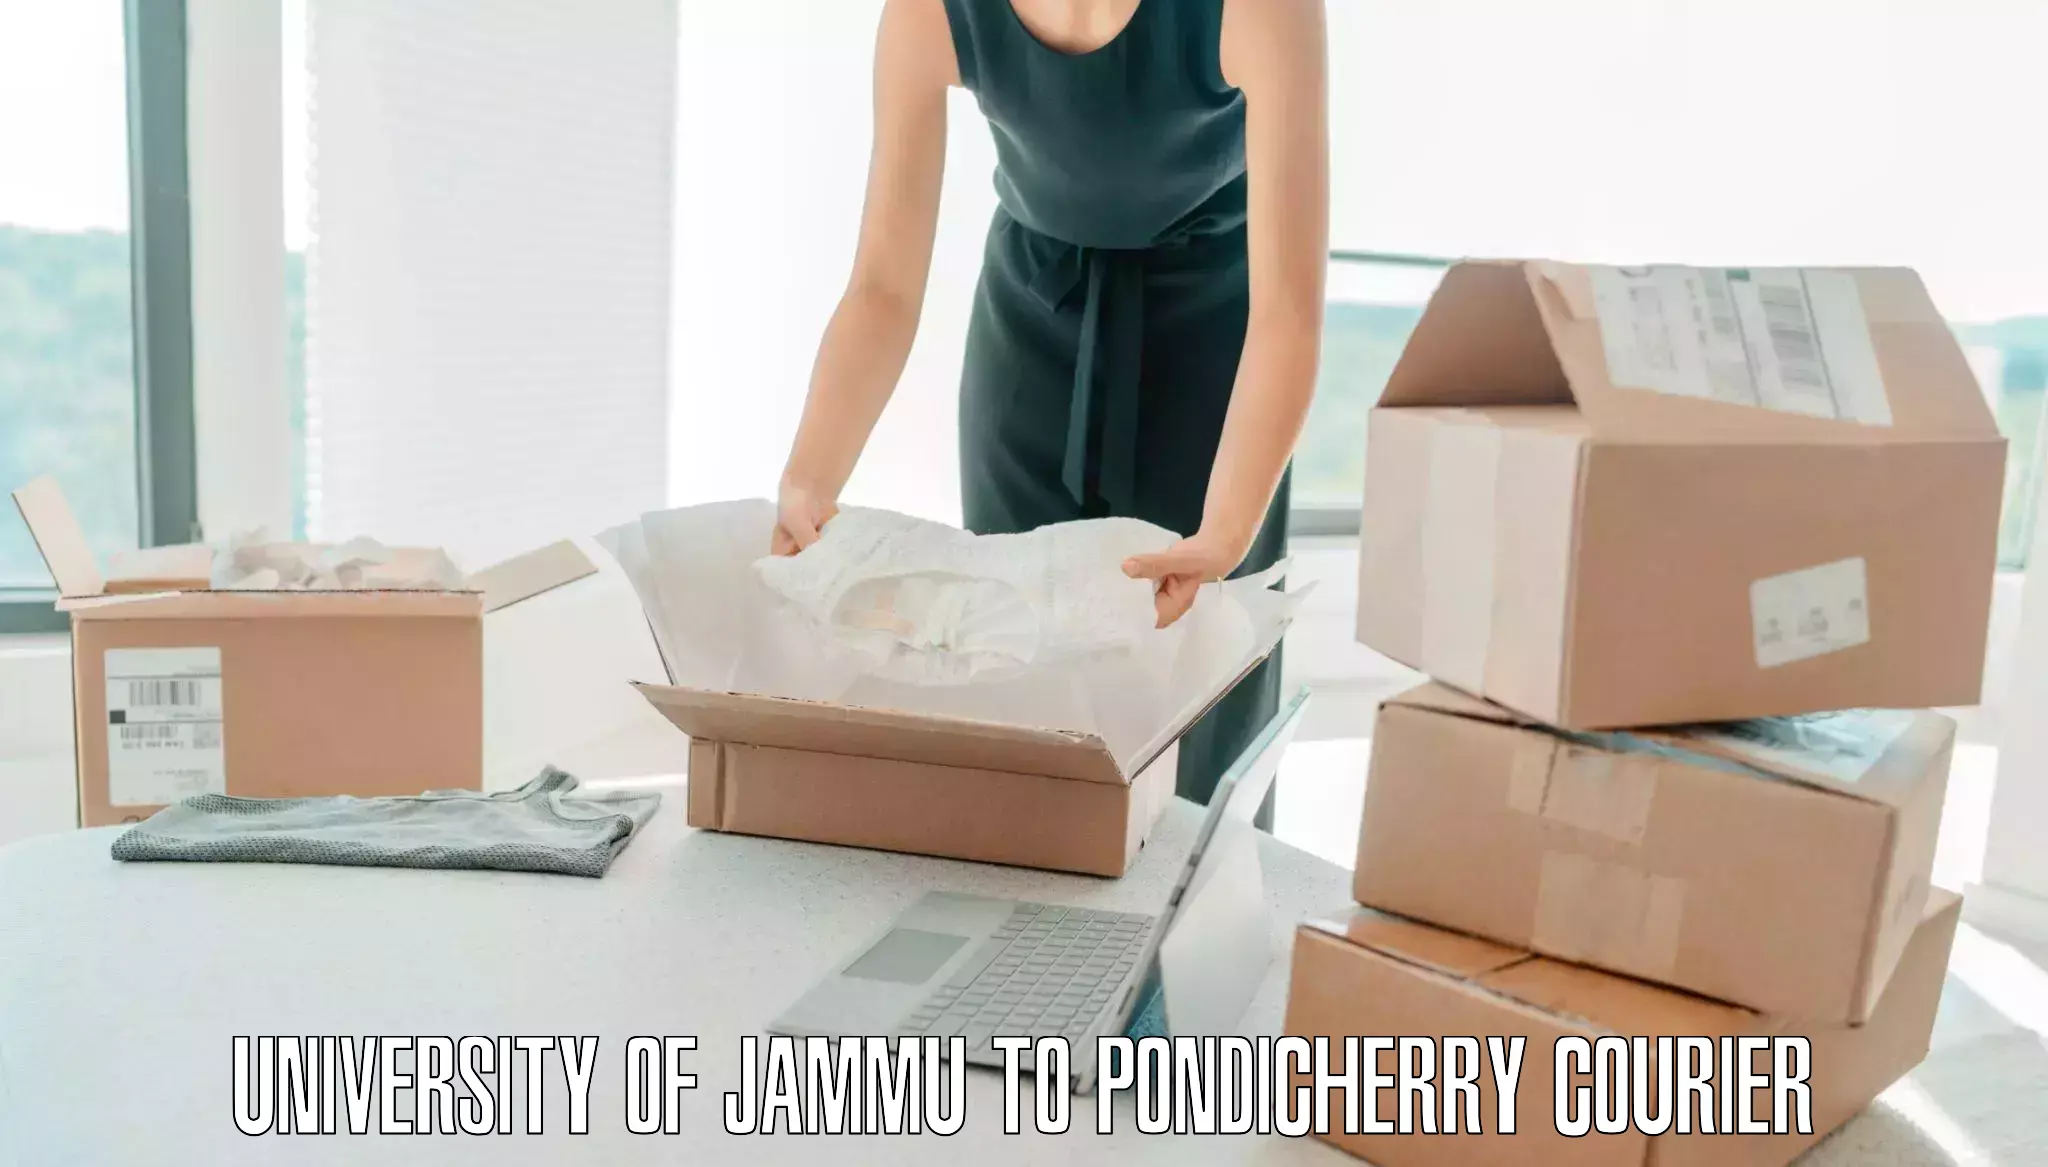 Luggage delivery logistics in University of Jammu to Pondicherry